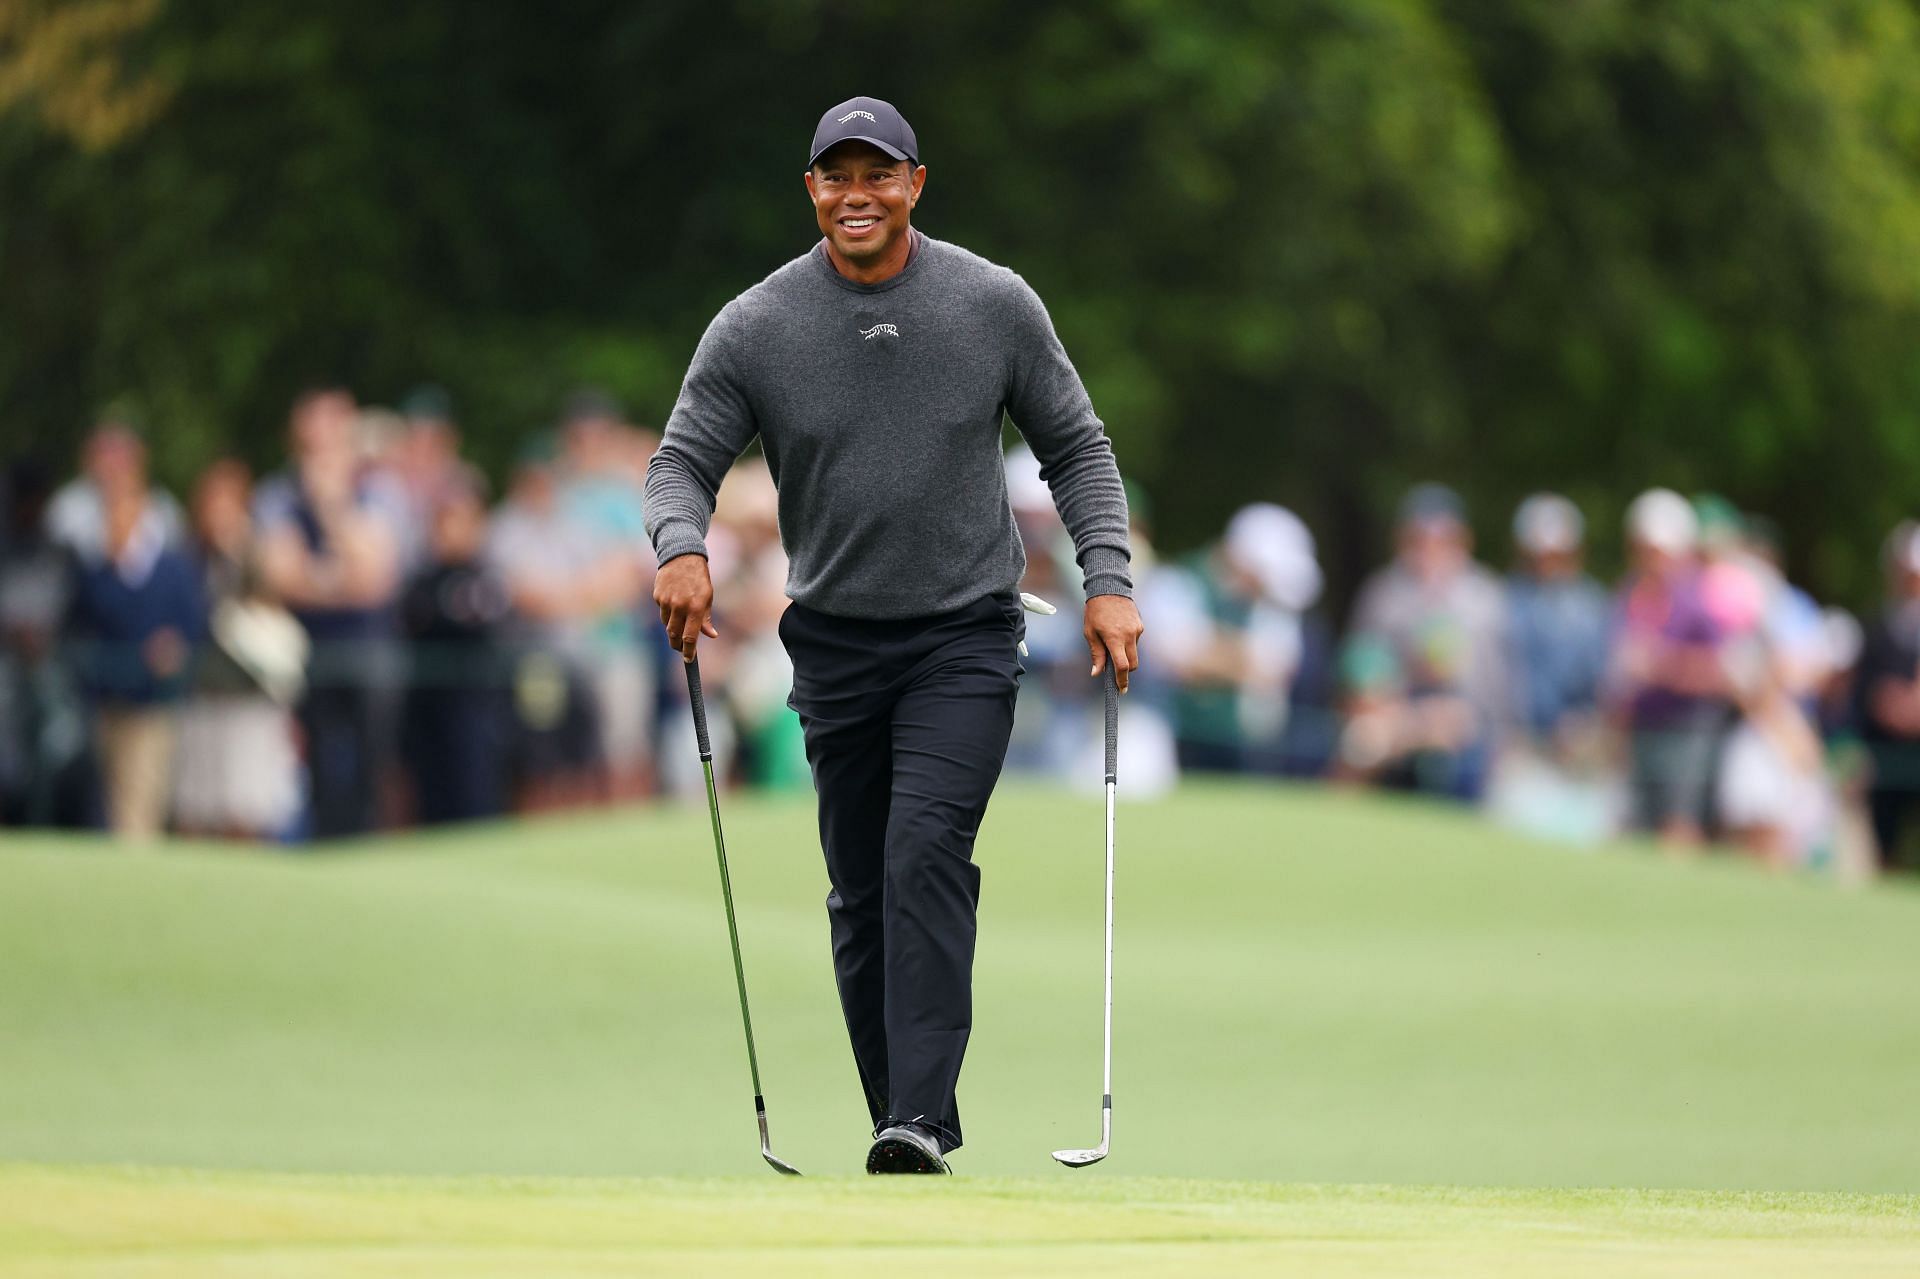 Can Tiger Woods stun the golf world again?